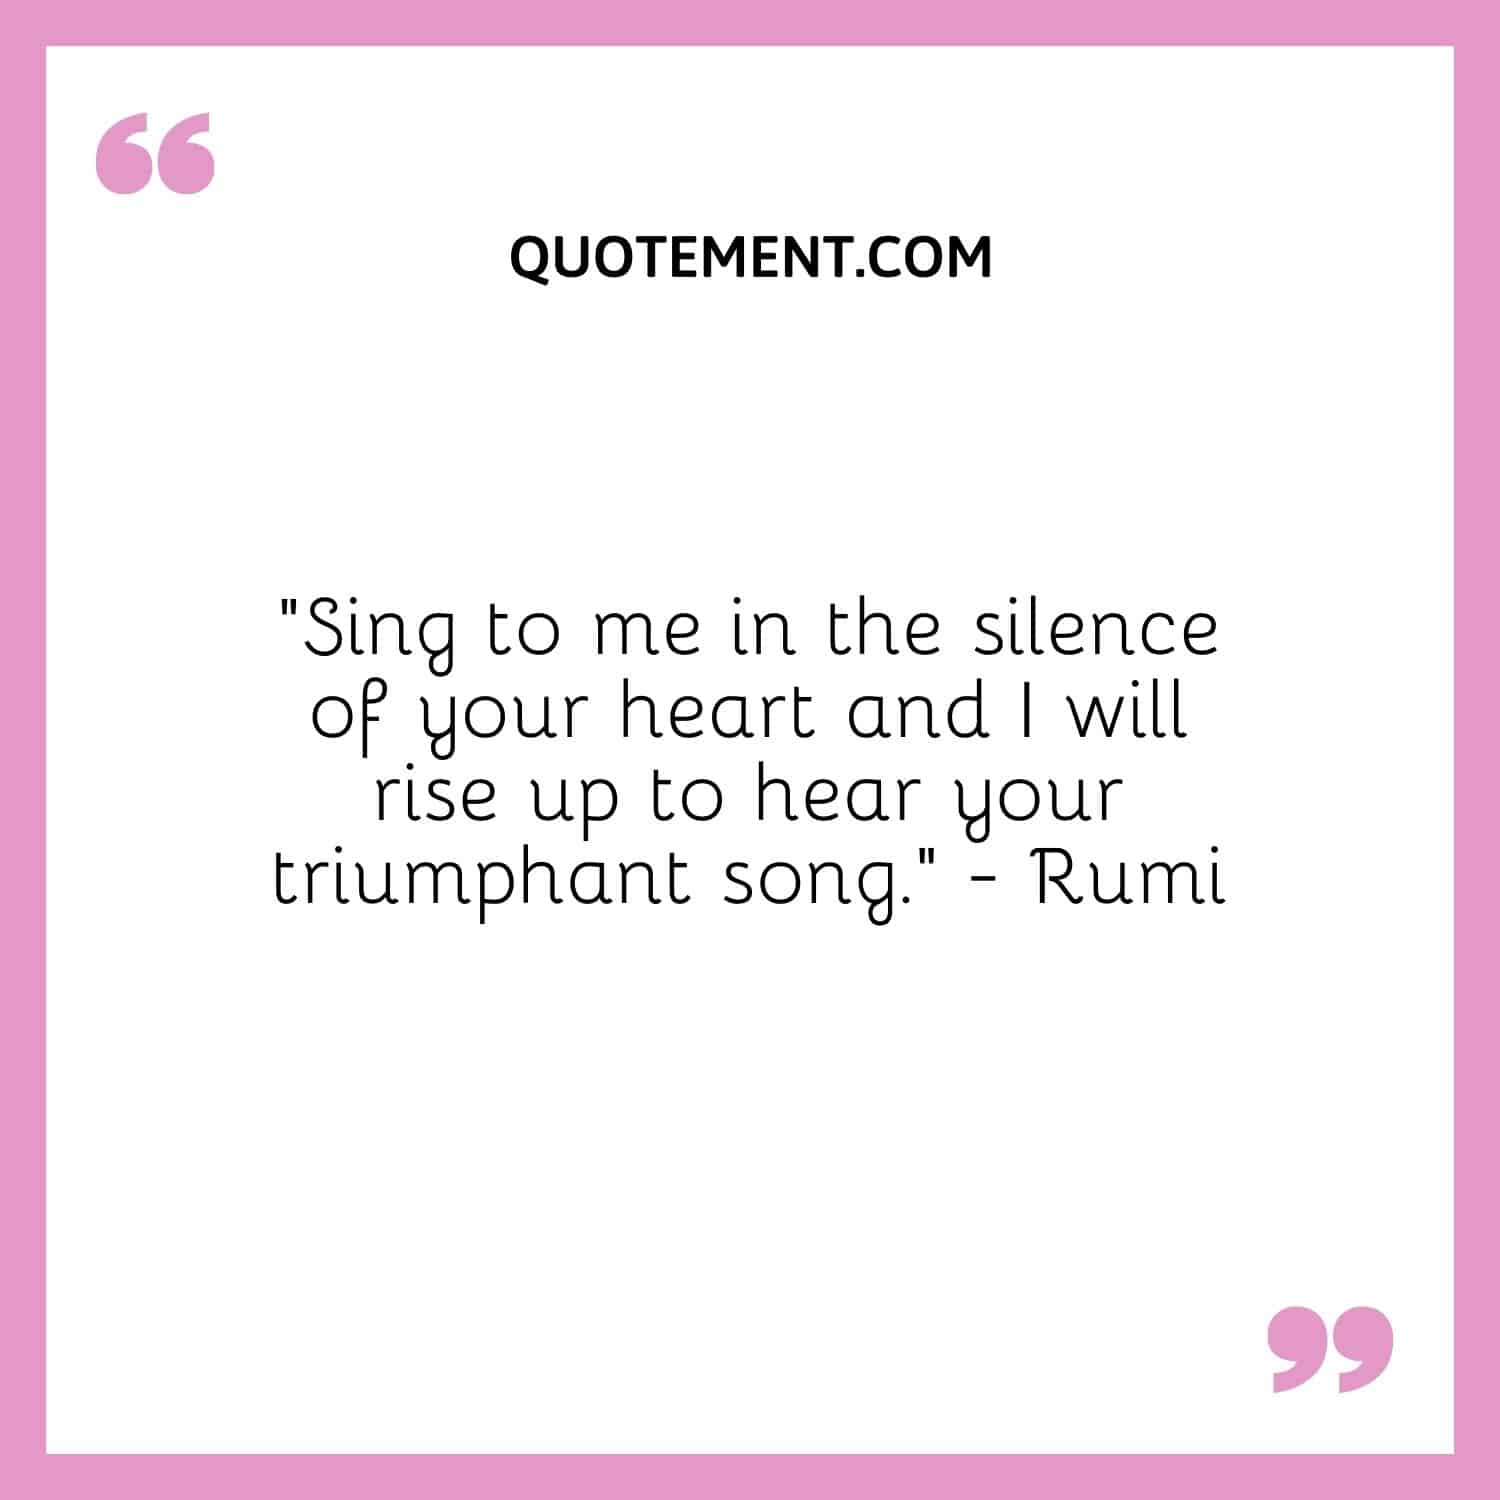 “Sing to me in the silence of your heart and I will rise up to hear your triumphant song.” — Rumi